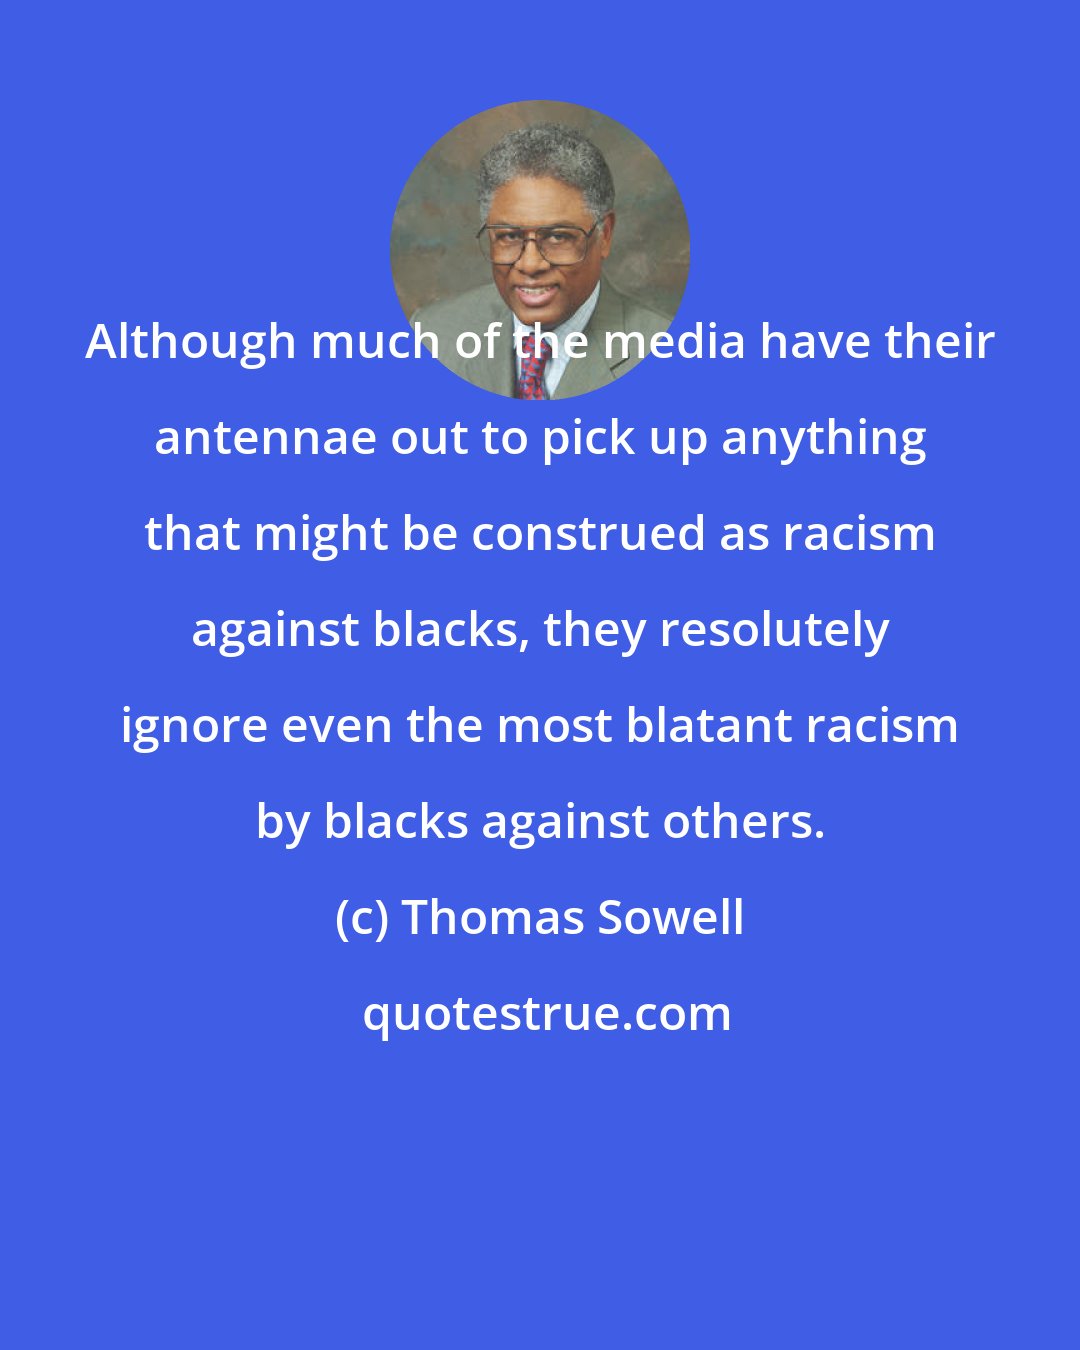 Thomas Sowell: Although much of the media have their antennae out to pick up anything that might be construed as racism against blacks, they resolutely ignore even the most blatant racism by blacks against others.